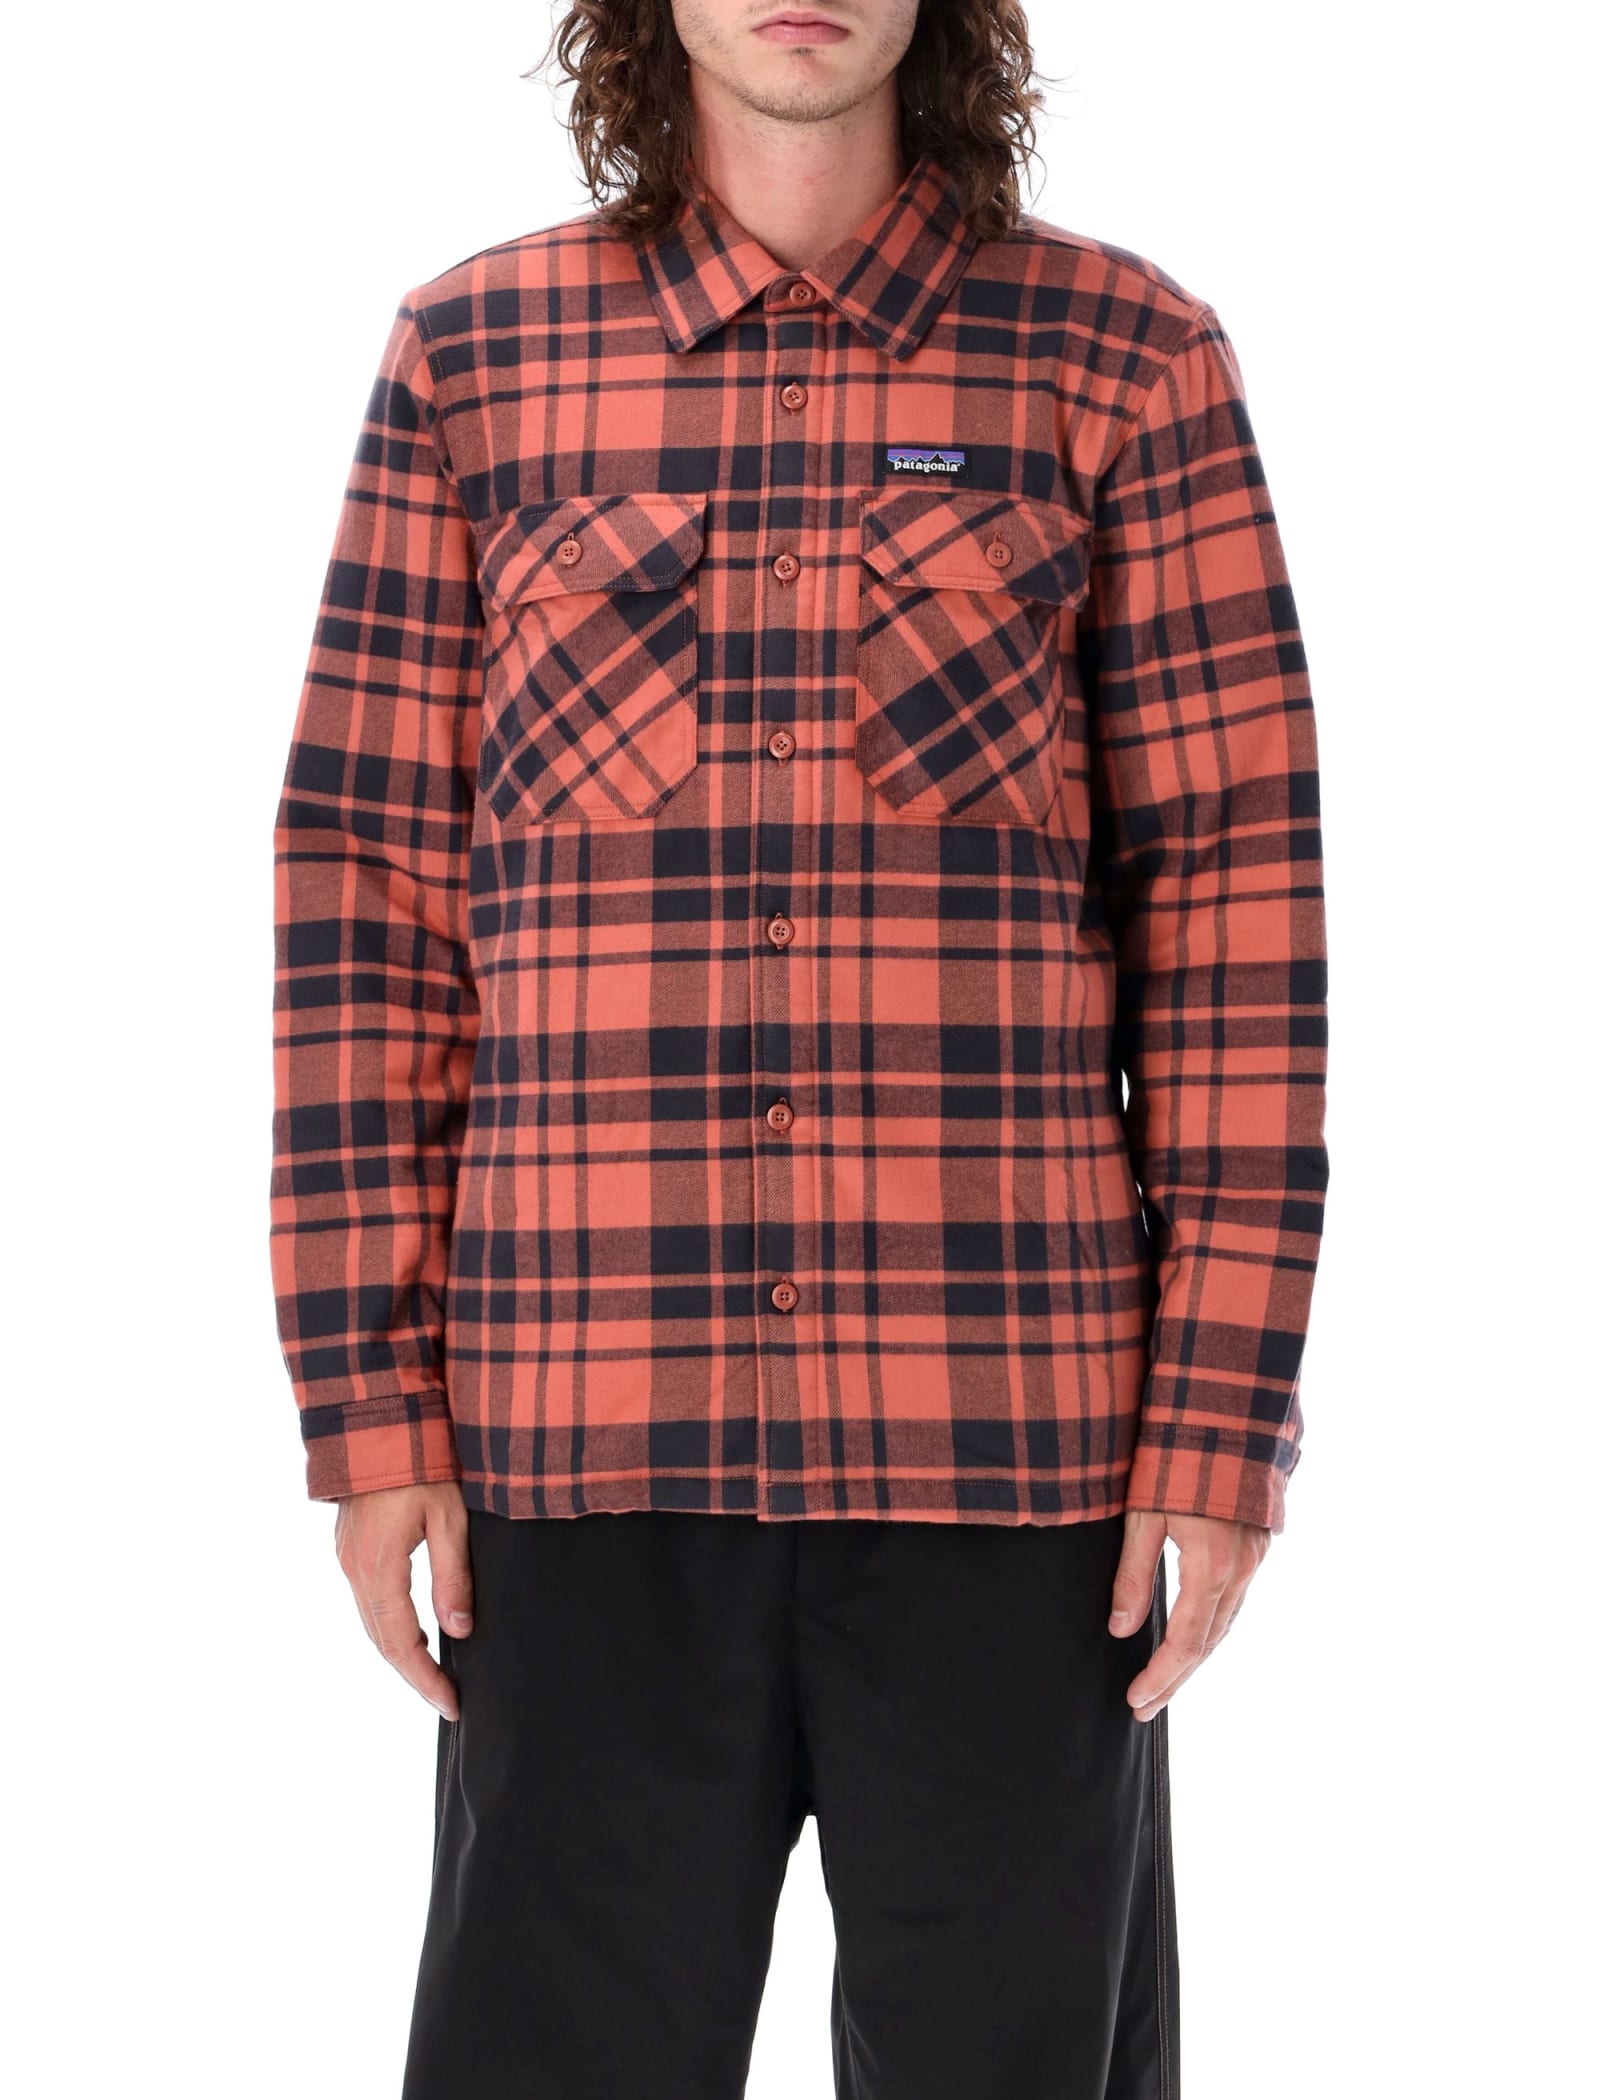 patagonia insulated check jacket